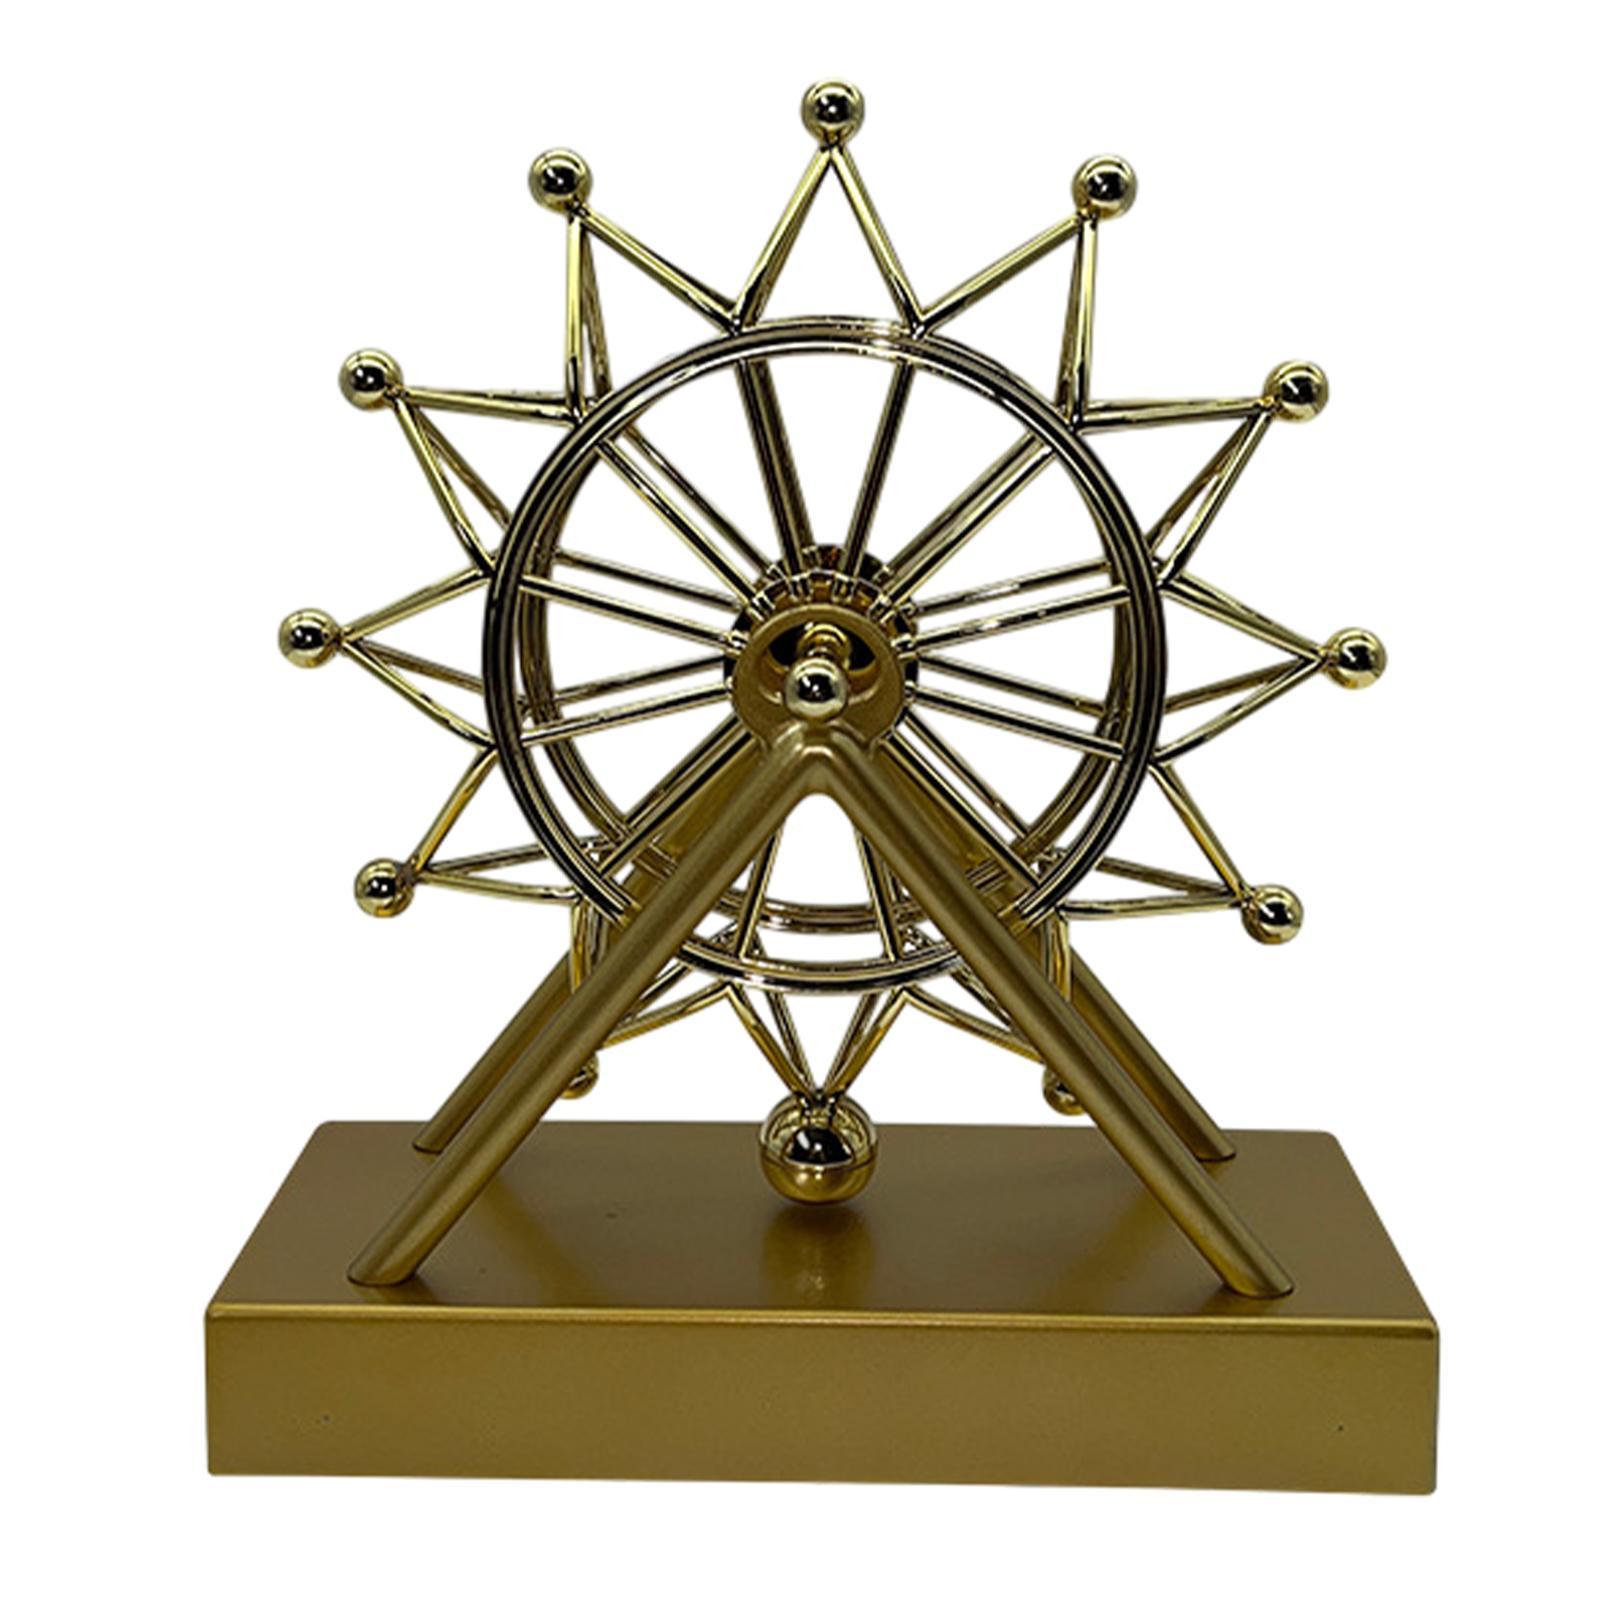 Wheel Ornament Home Office Decoration Balancing Physical Science Toy